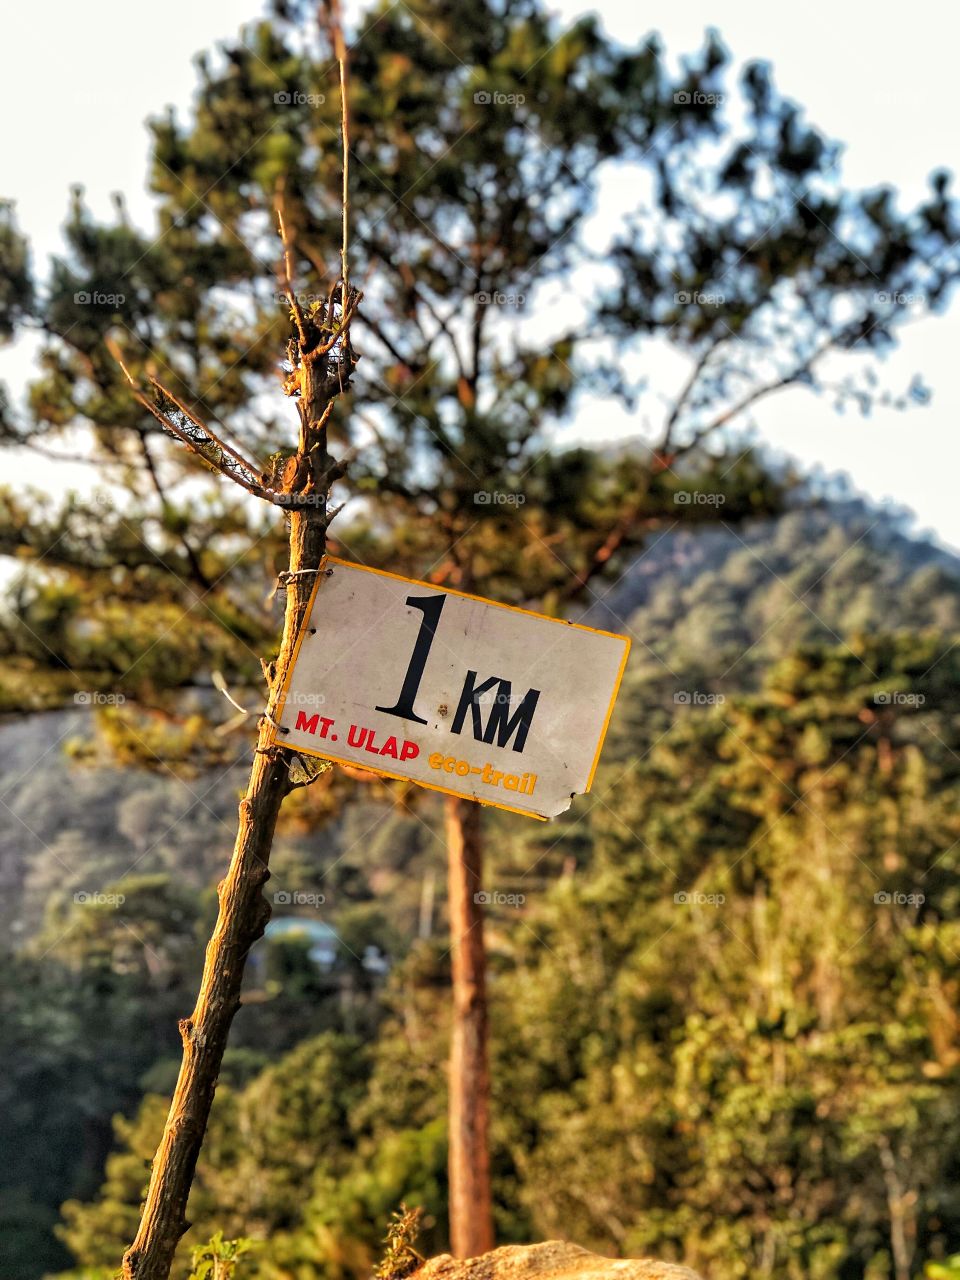 Let's start the climb! 1KM of 9.1KM from the starting trail. Ofcourse I can finish the clim! 💪🏃🚵⛰️🏞️